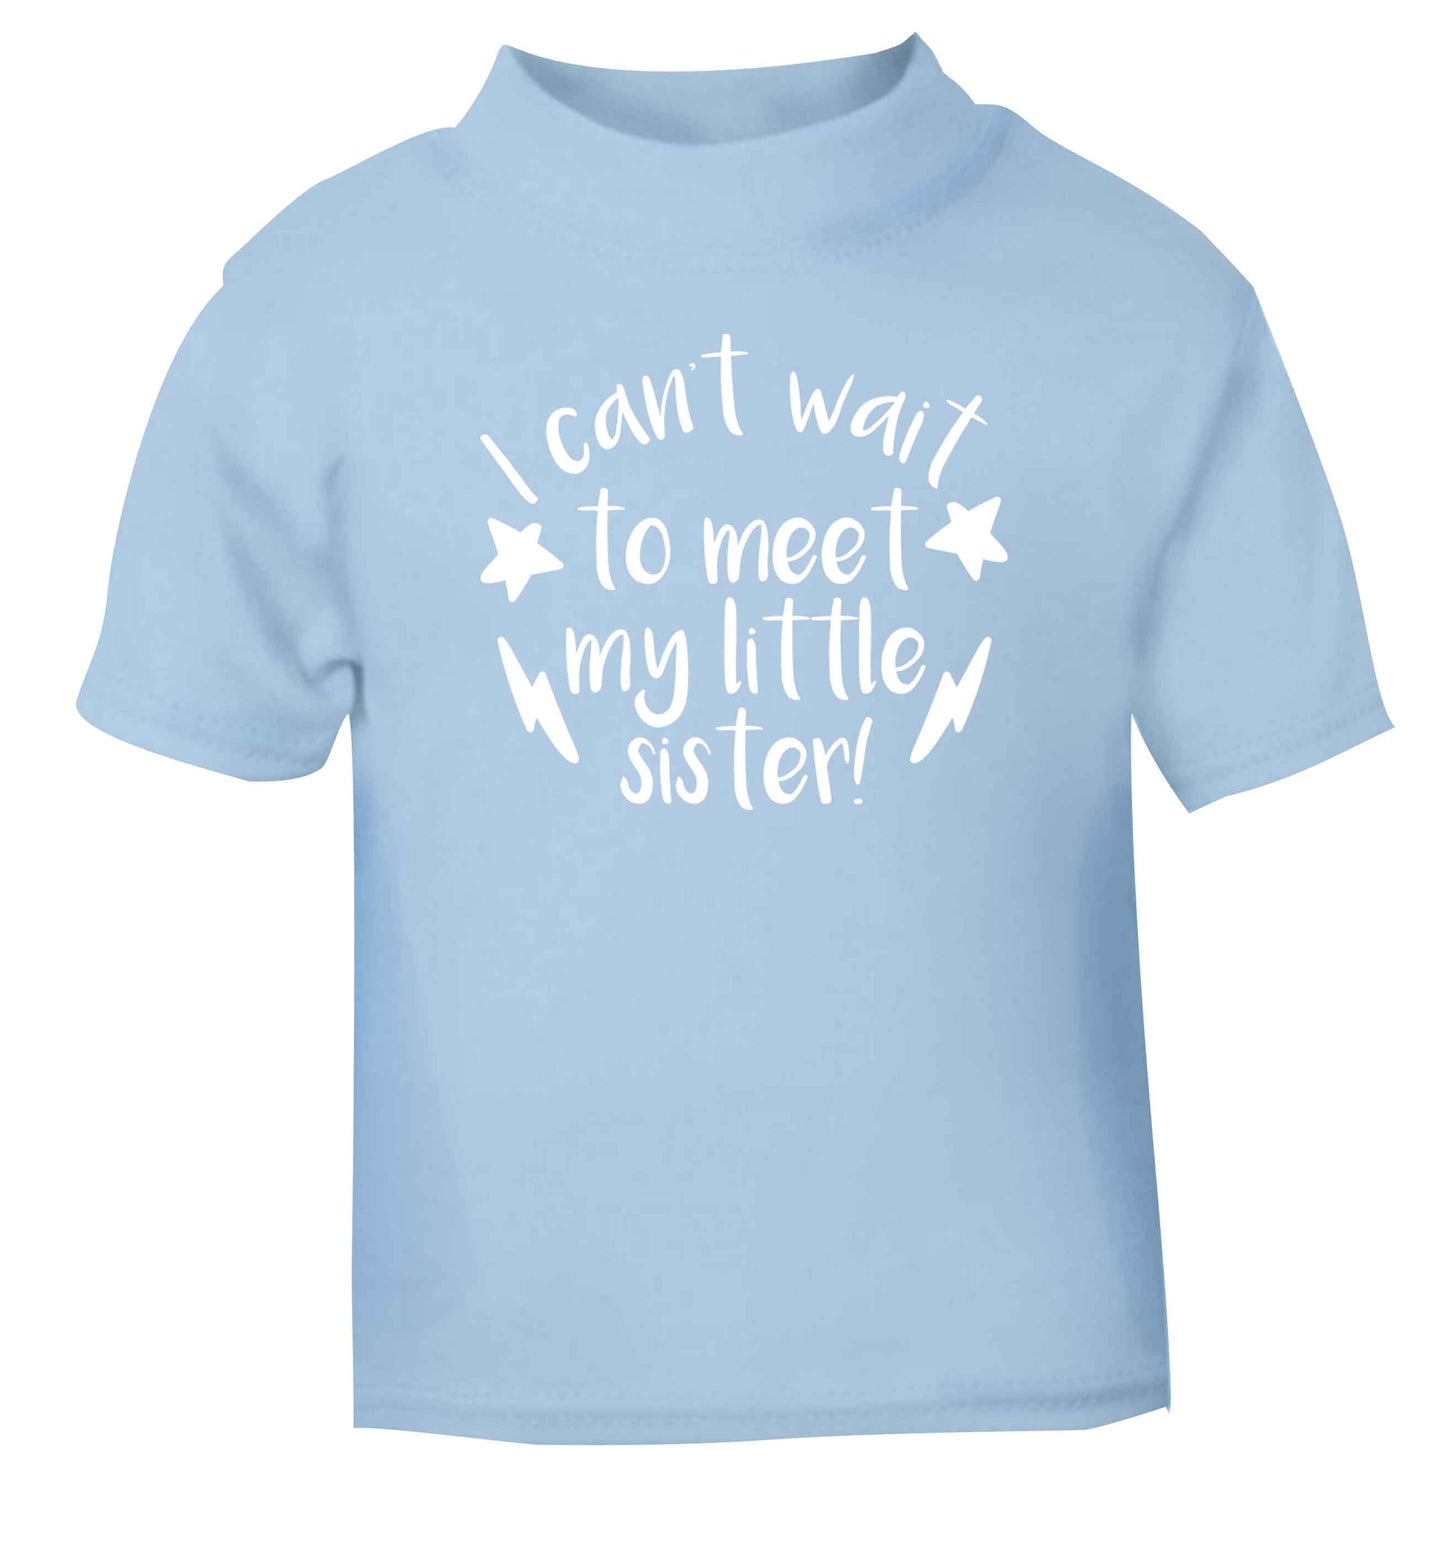 Something special growing inside it's my little sister I can't wait to say hi! light blue Baby Toddler Tshirt 2 Years